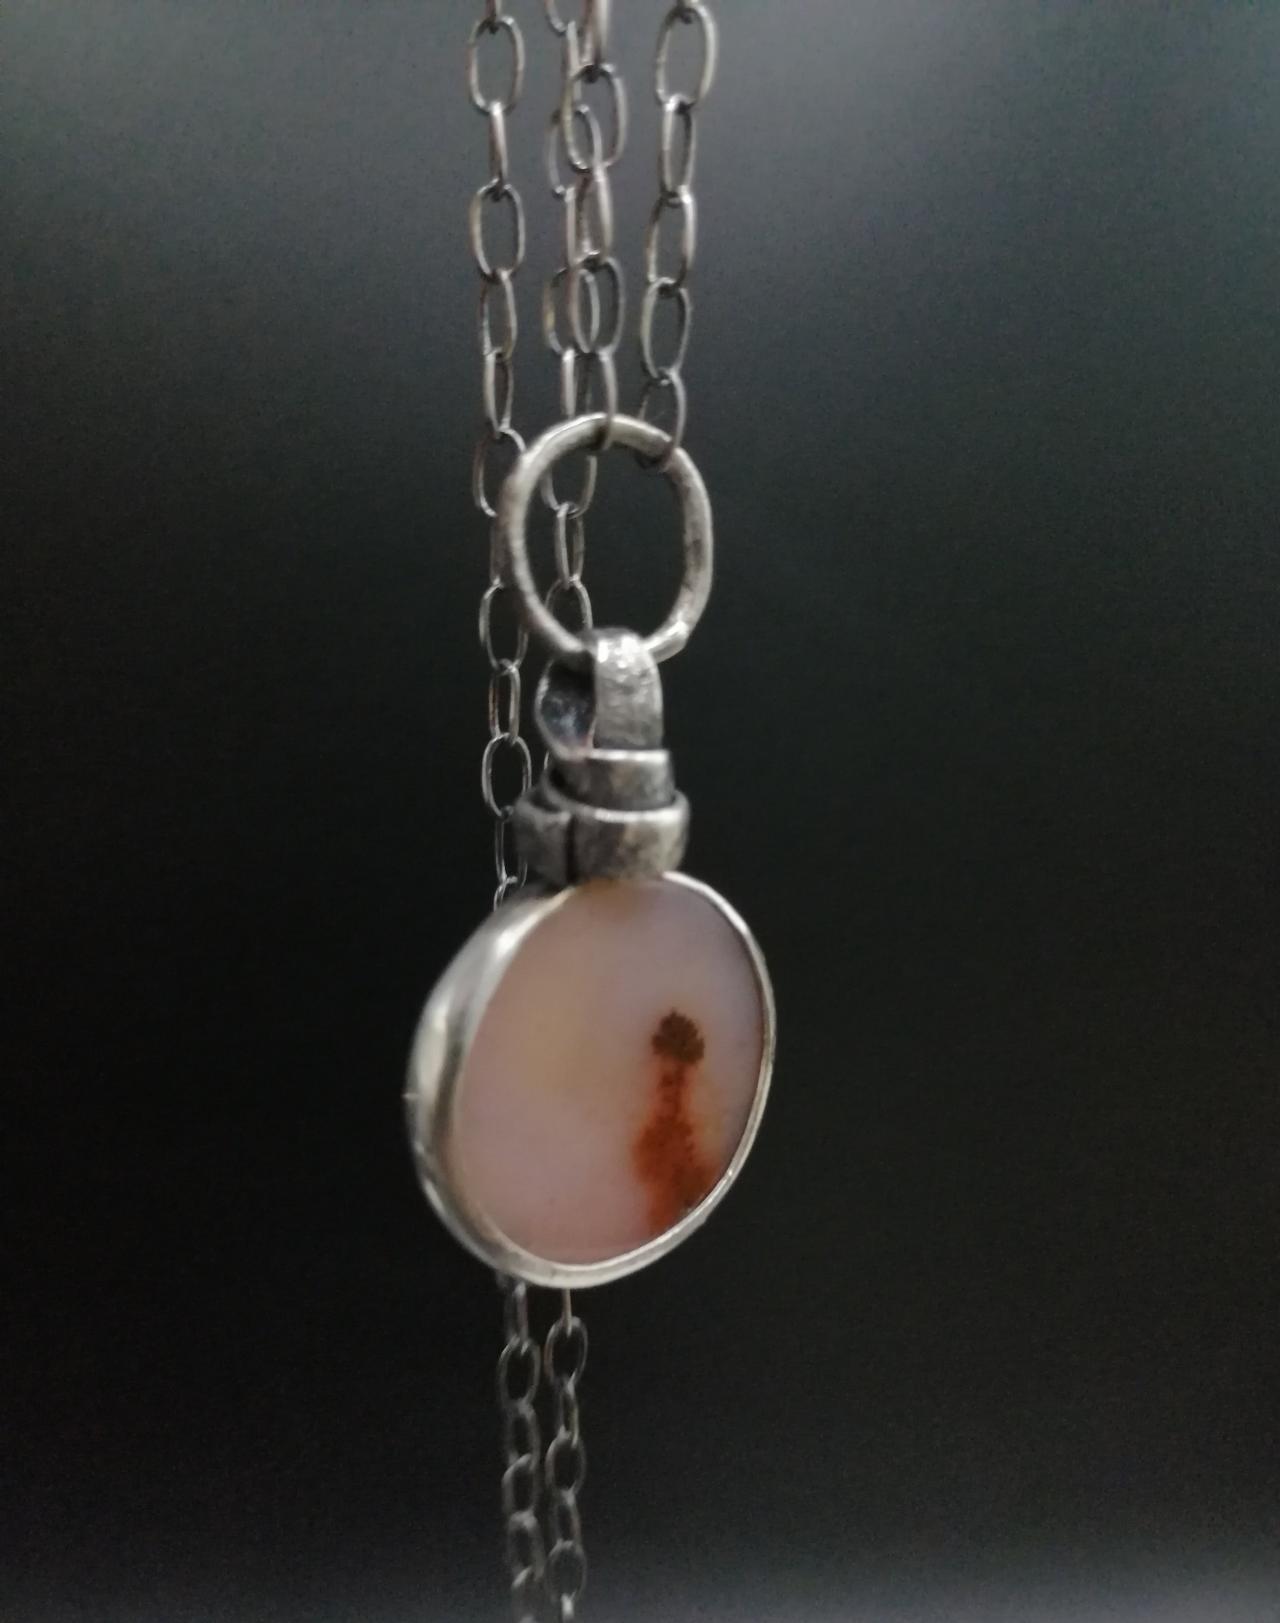 Natural Pink Agate Gemstone Necklace, Poetic, Necklaces For Women, Sister, Wabi Sabi, Edgy, Raw, Pendulum, Gift For Mom, Sterling Necklace